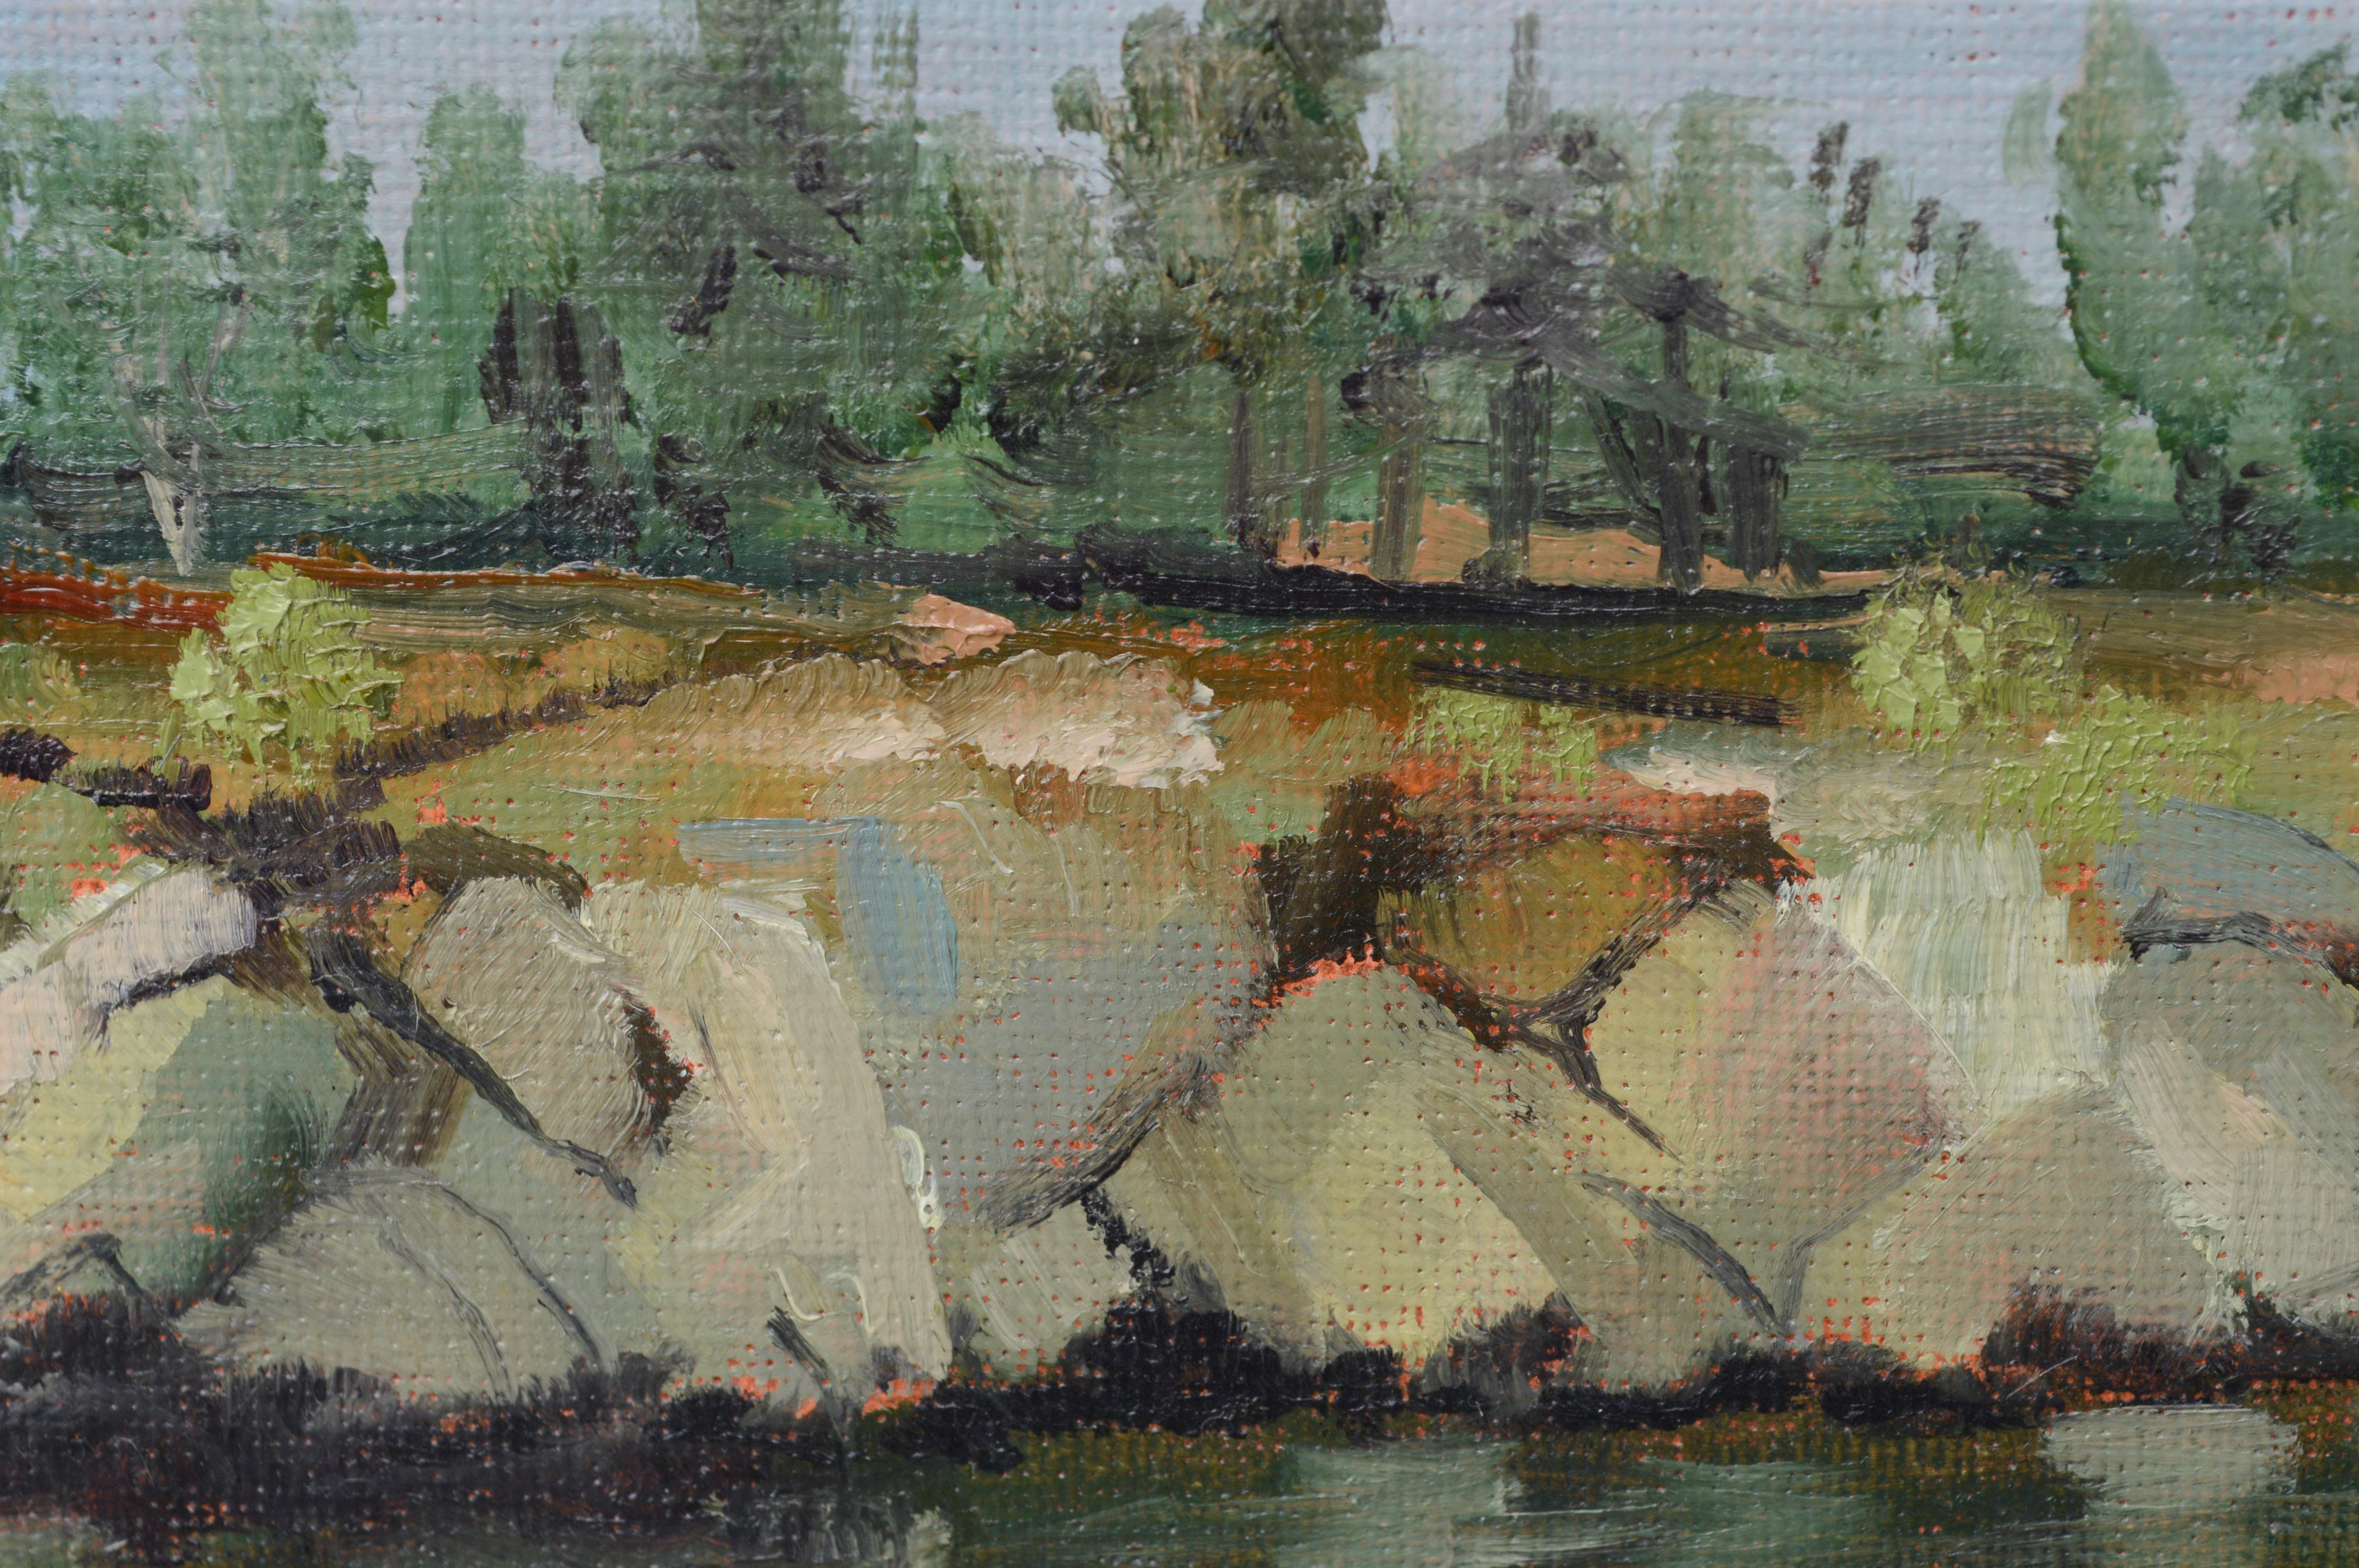 Reflections on the River - Landscape - Painting by Kathleen Murray